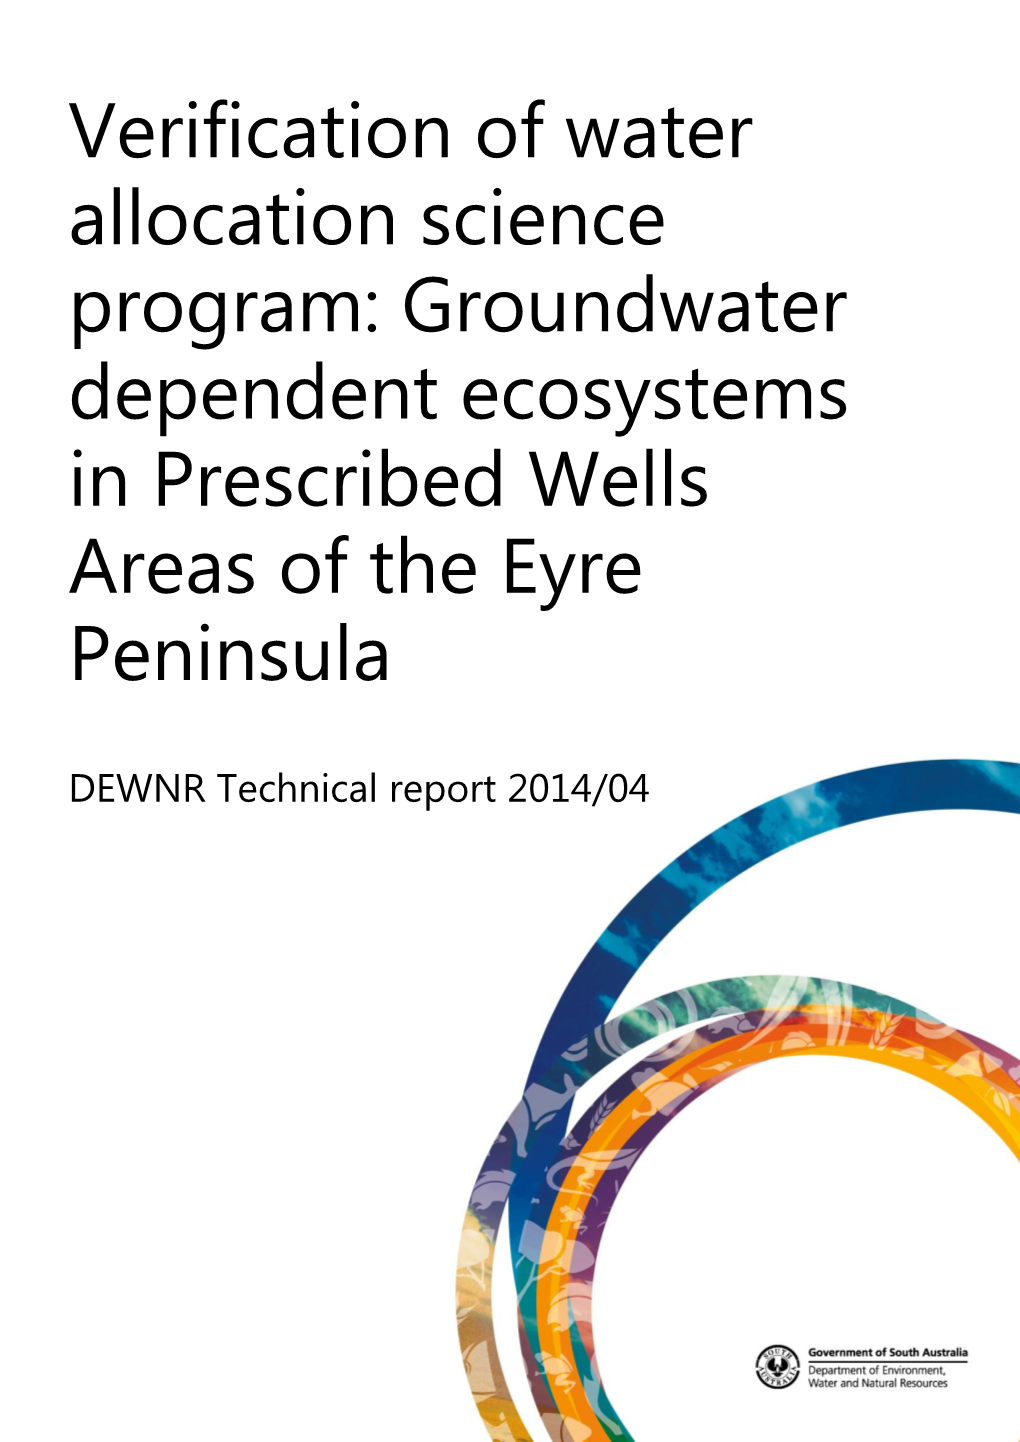 Groundwater Dependent Ecosystems in Prescribed Wells Areas of the Eyre Peninsula